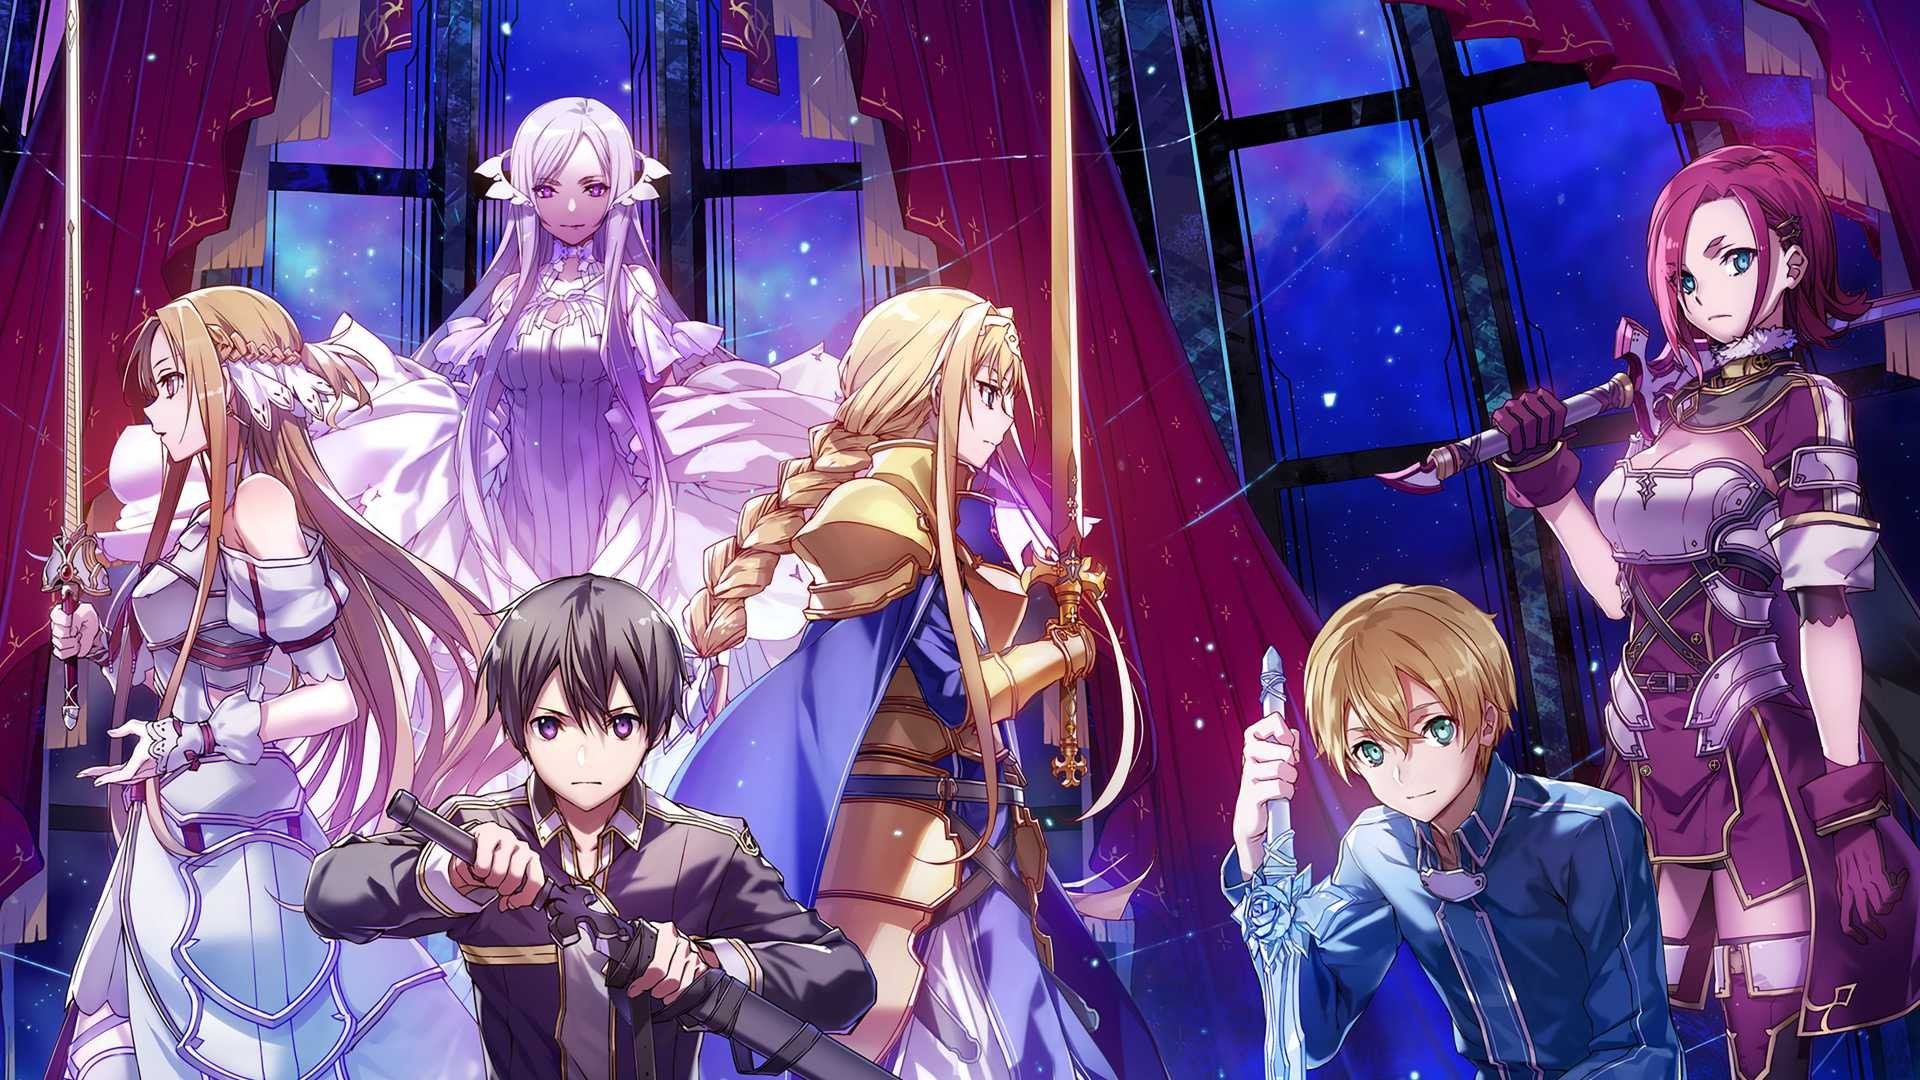 Hands On: Sword Art Online: Alicization Lycoris Is a Technical Mess on PS4